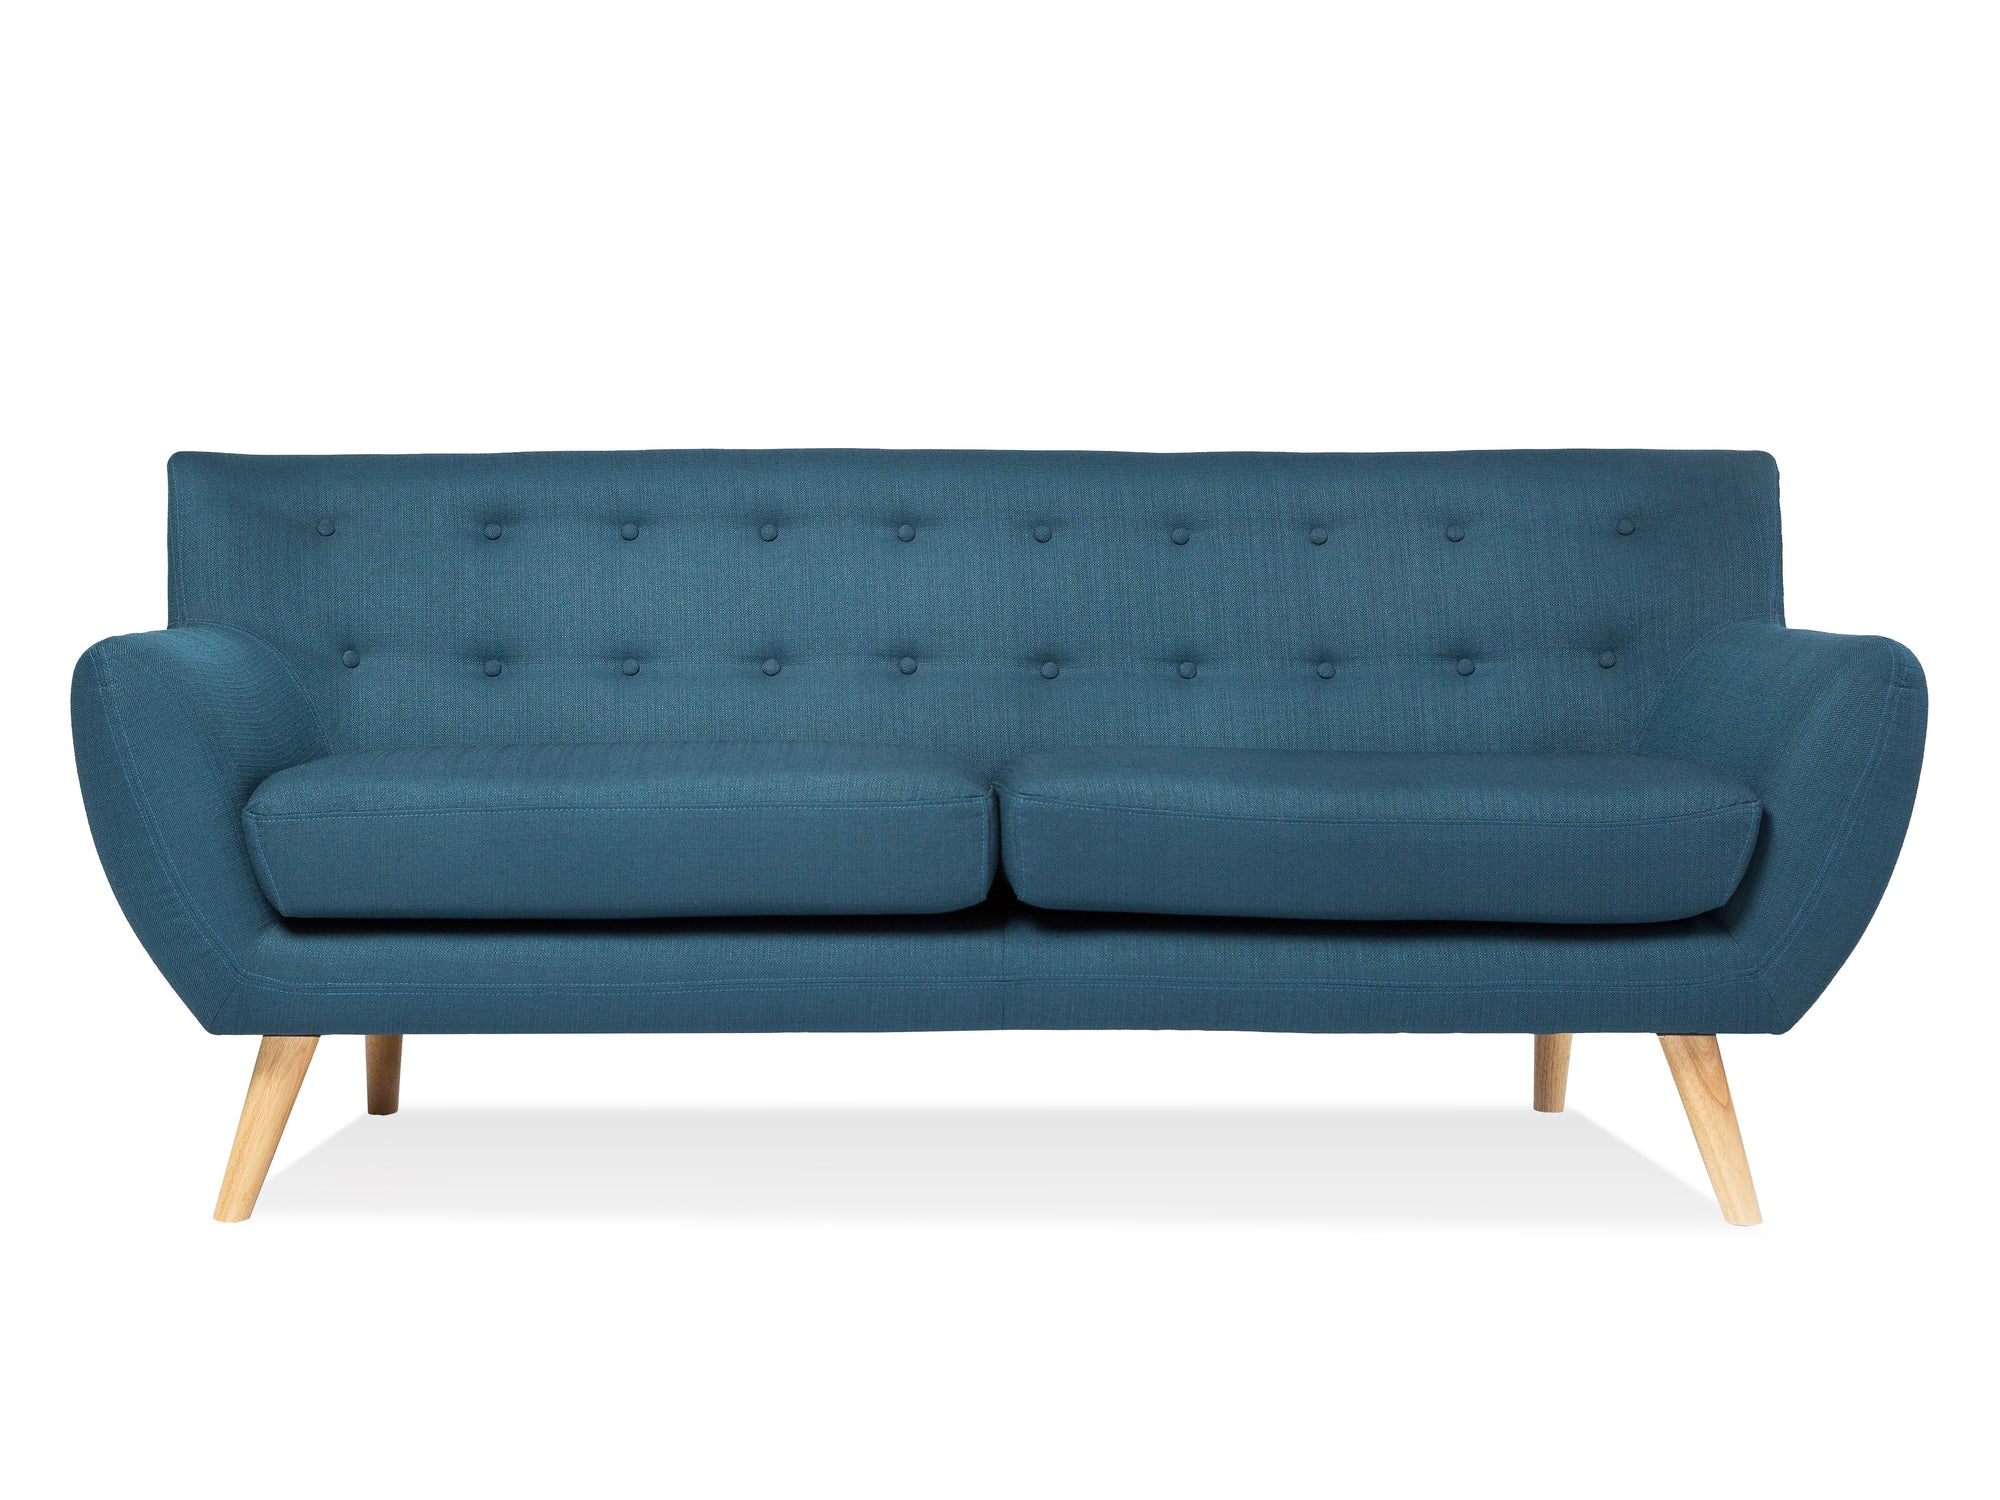 Compact Colorful Sofa - The Everset